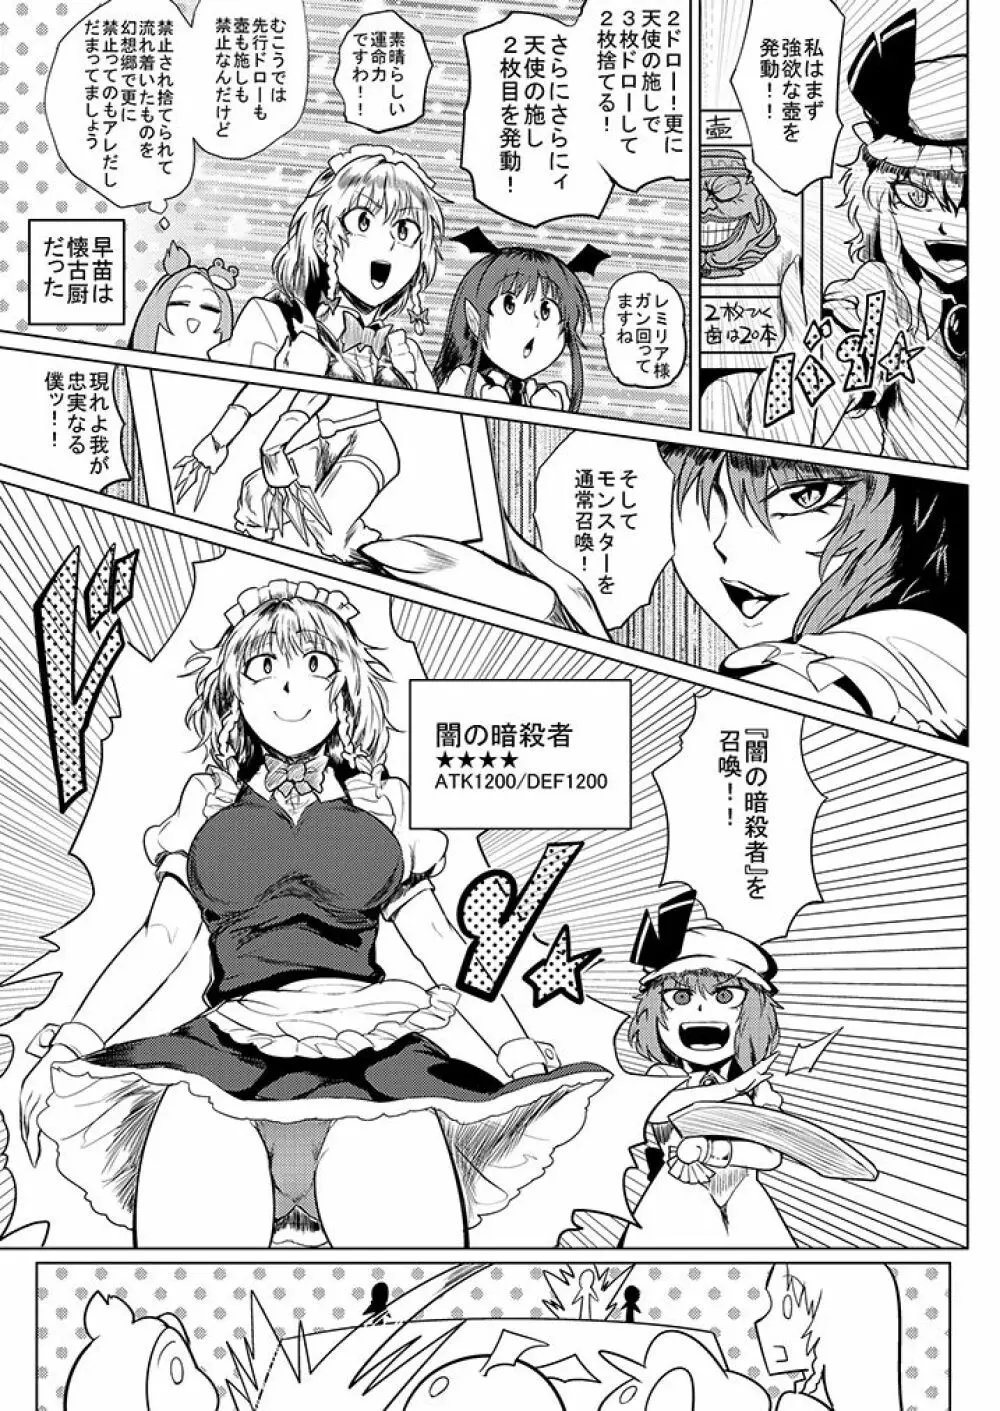 SAKUYA MAID in HEAVEN/ALL IN 1 - page435